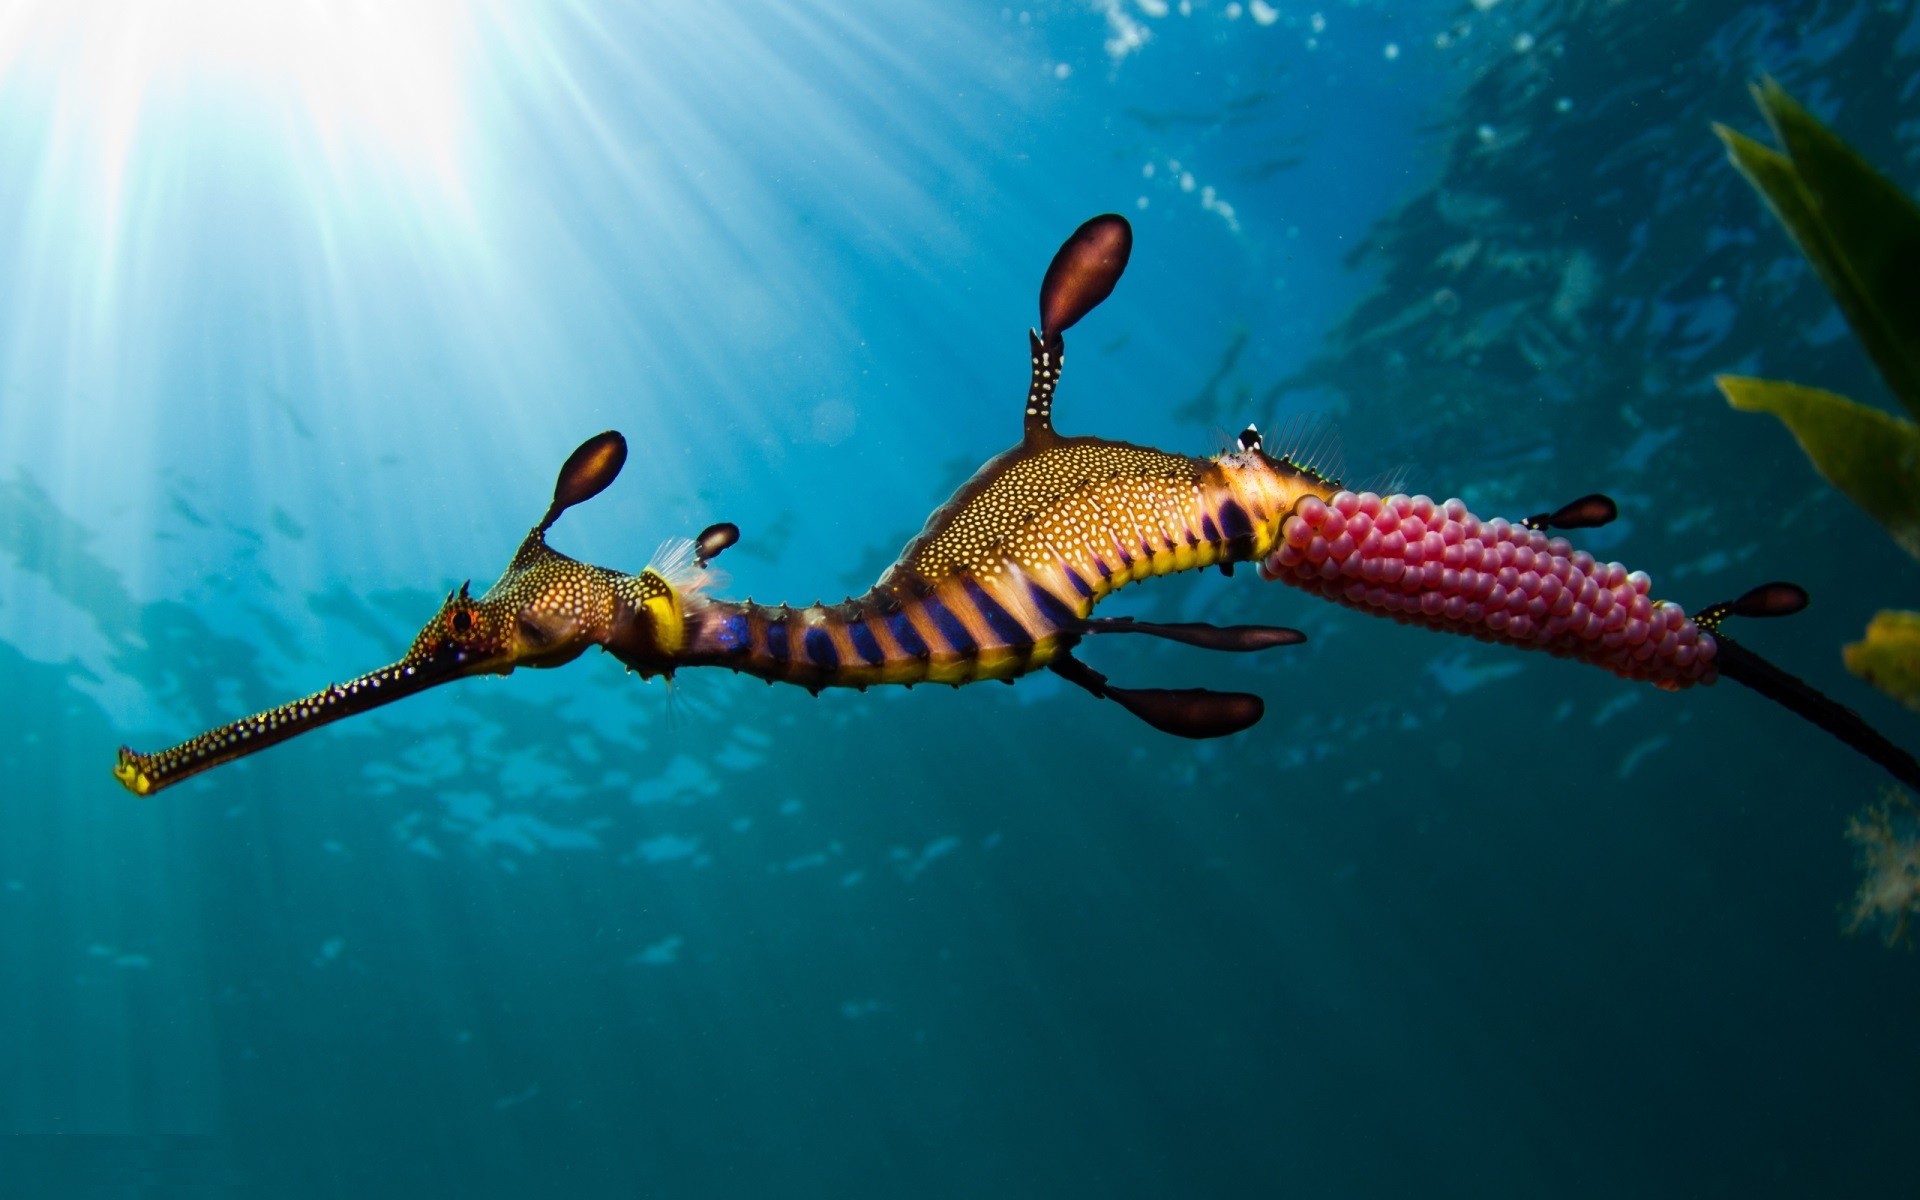 Seahorse Widescreen High Definition Wallpaper Download Full